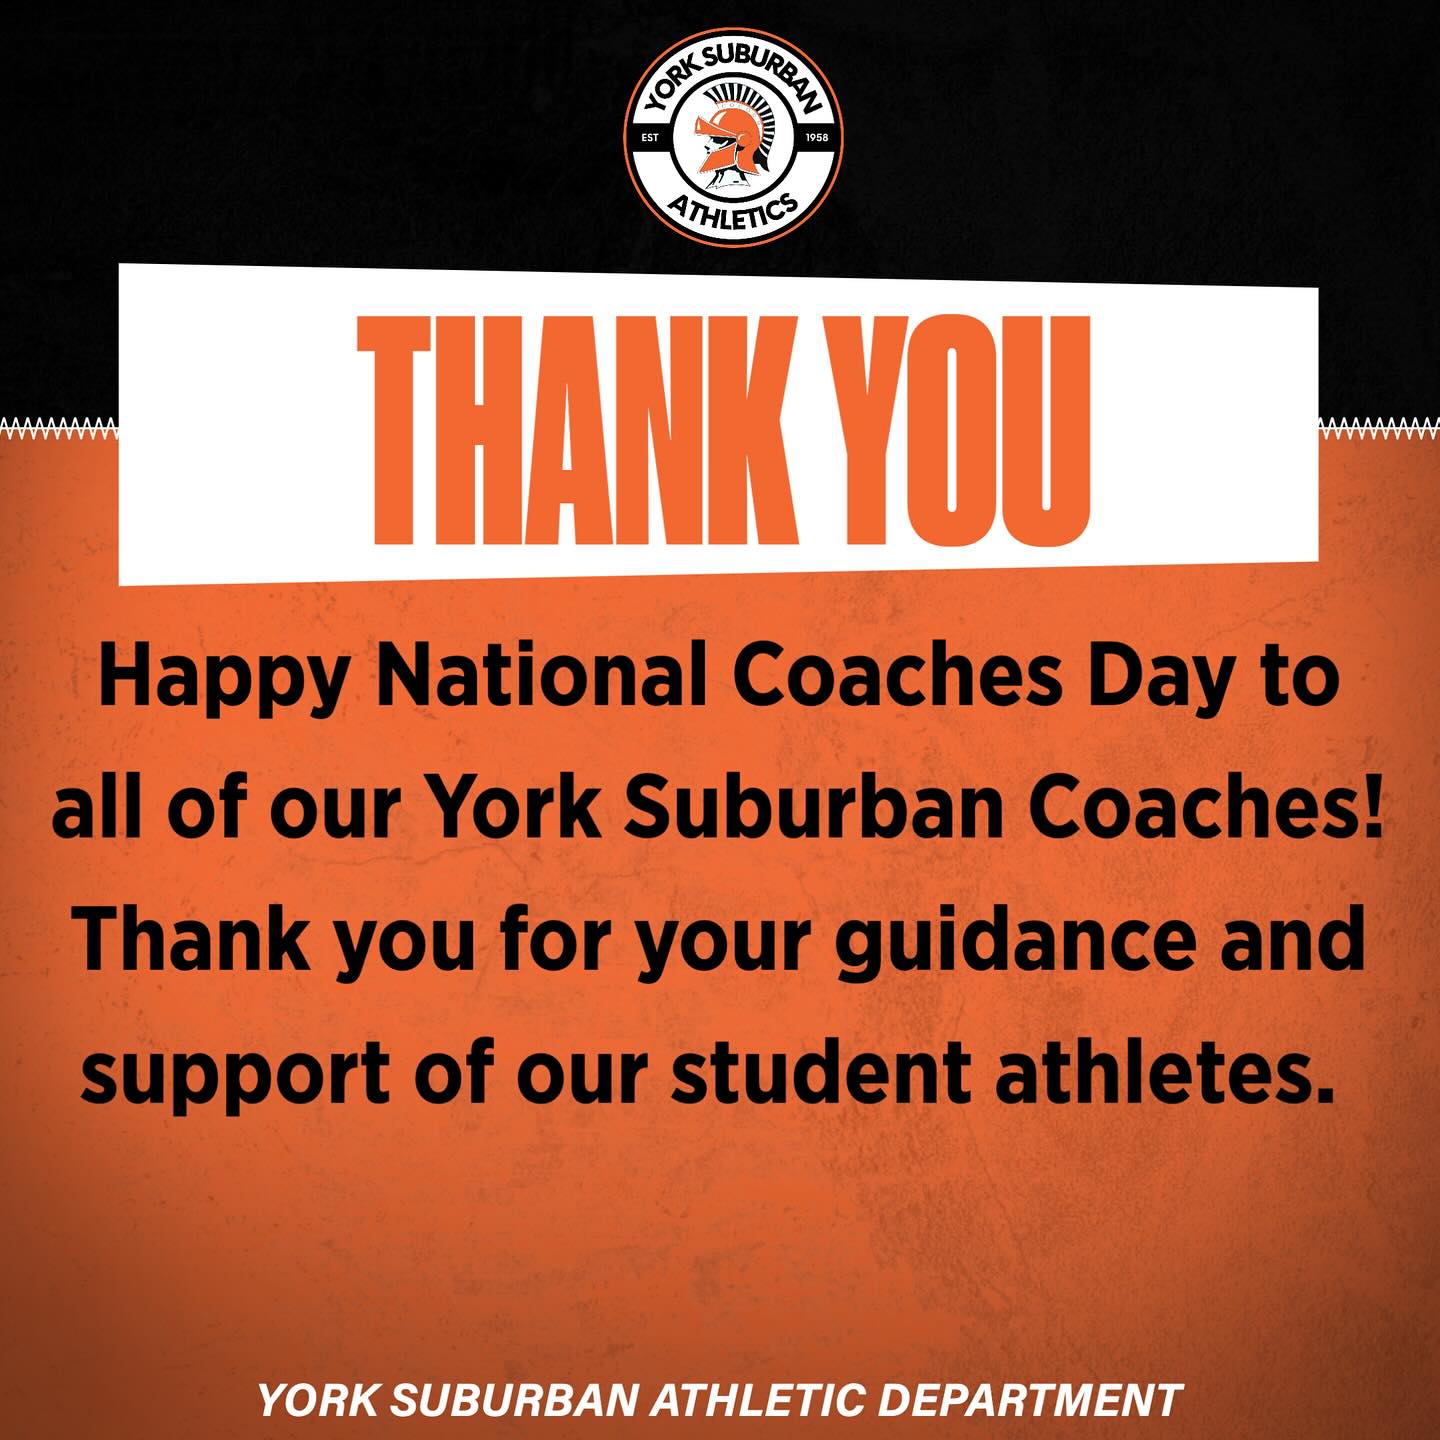 Thank you image for National Coaches Day